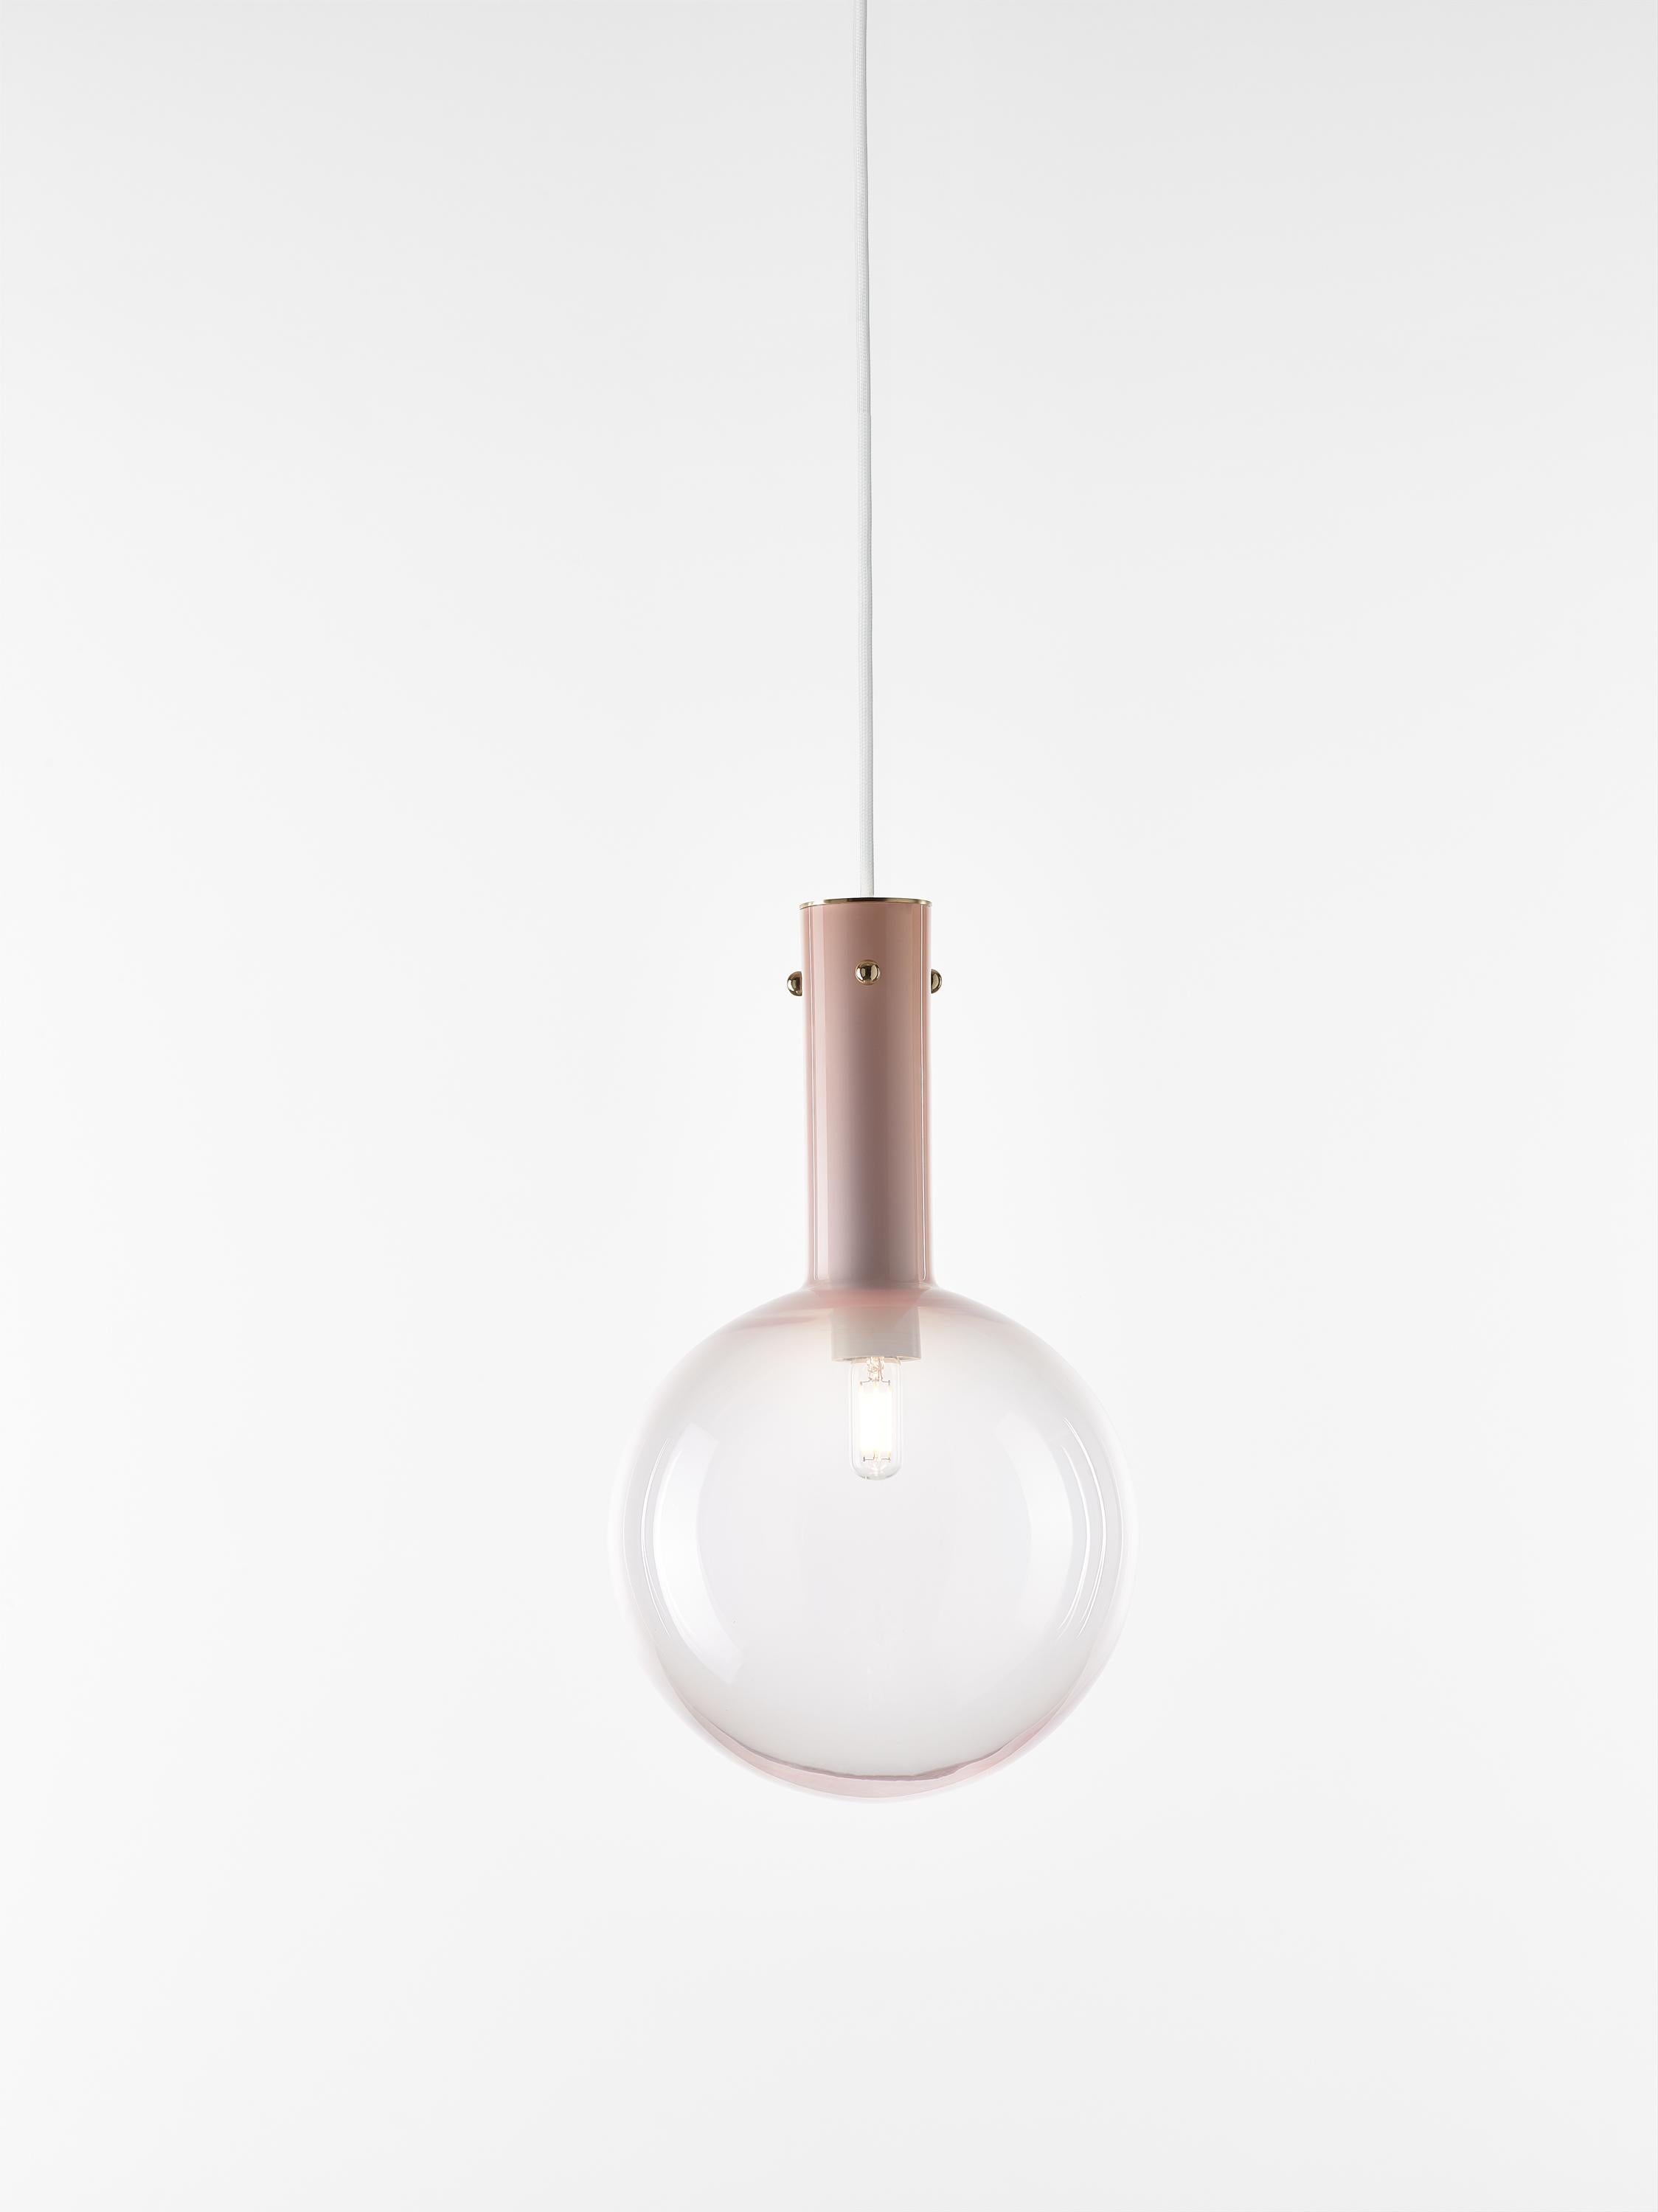 Pink Sphaerae pendant light by Dechem Studio
Dimensions: D 20 x H 180 cm
Materials: brass, metal, glass.
Also available: different finishes and colors available.

Only one homogenous piece of hand-blown glass creates the main body of Sphaerae